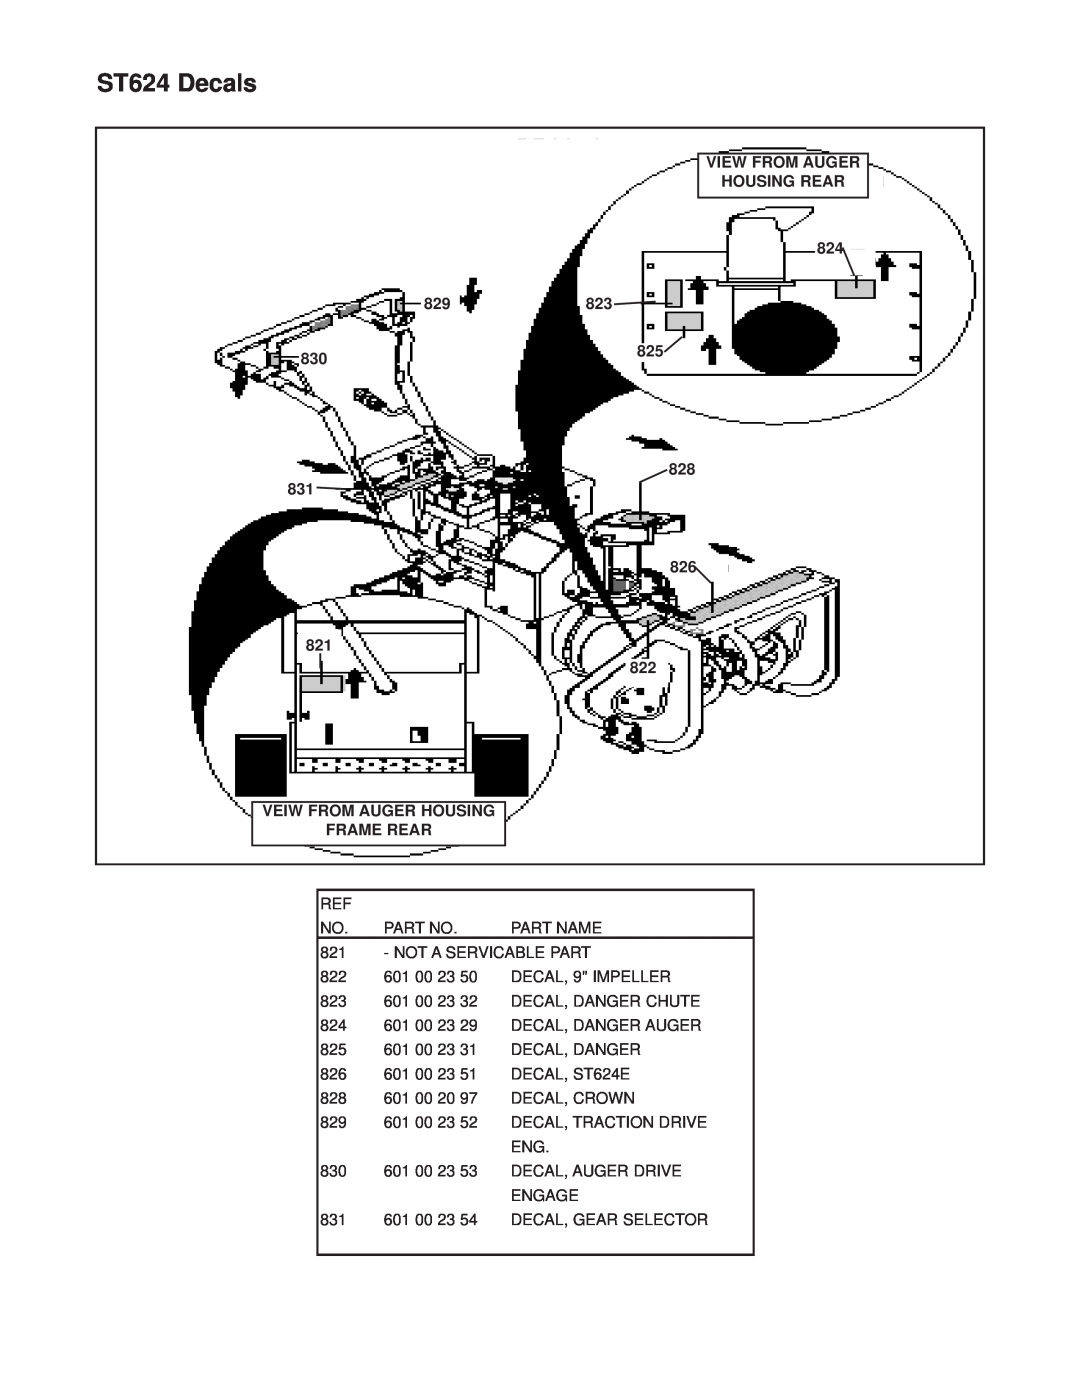 Husqvarna ST624E manual ST624 Decals, VIEW FROM AUGER HOUSING REAR 824 829823, 828 831 